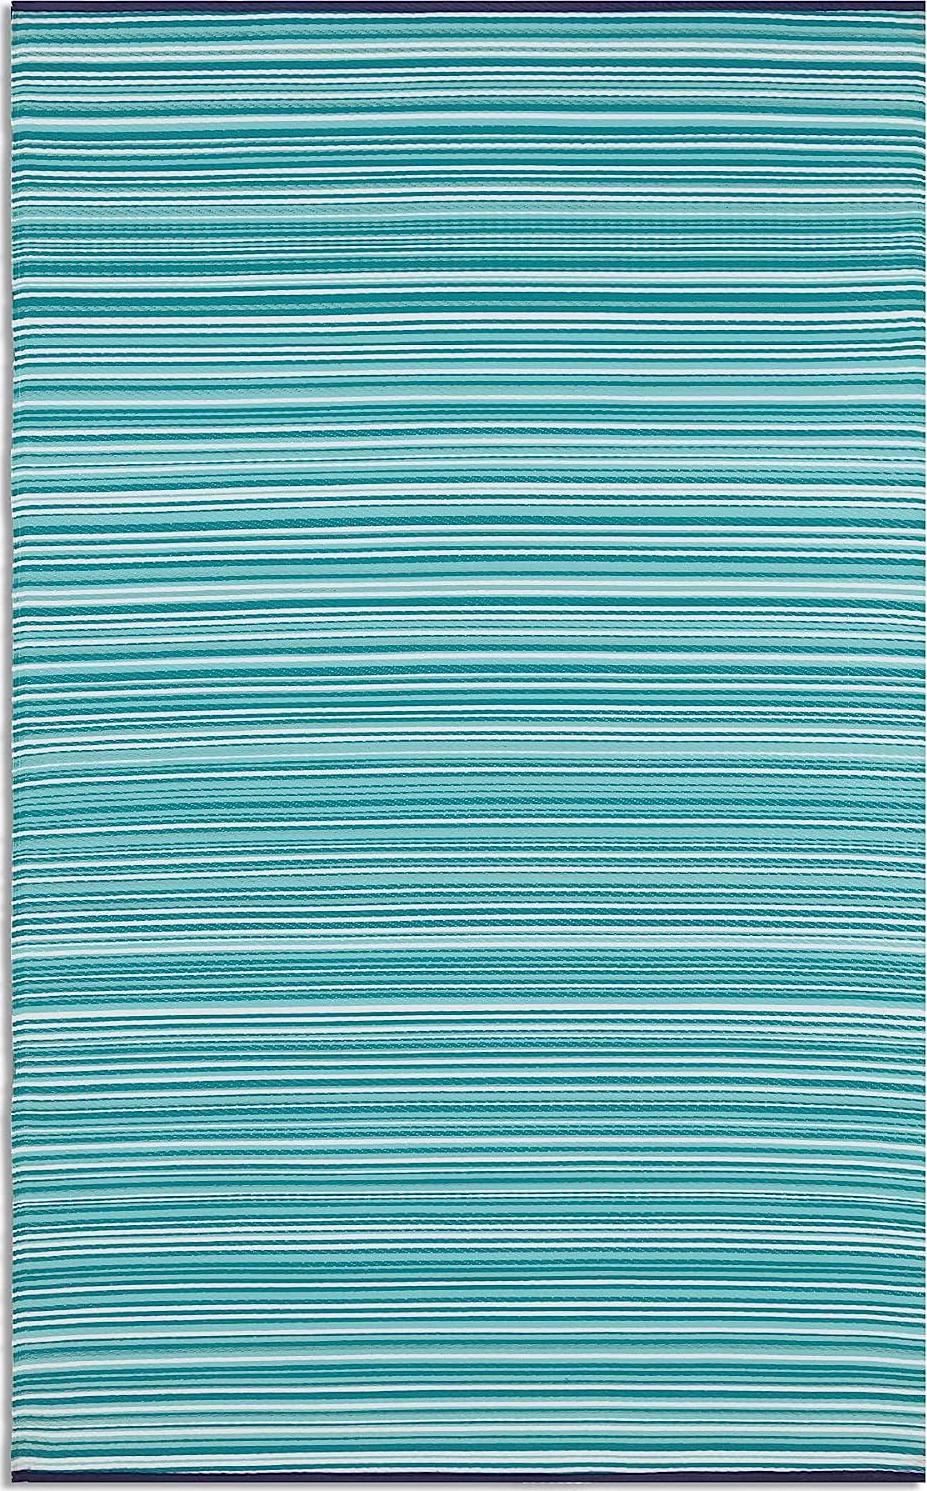 Trava Home Outdoor Rug - Reversible Modern Design, 4 x6 Blue Stripe, Easy to Clean, Water Resistant, Durable for Indoor, Patio, and Living Room Décor-